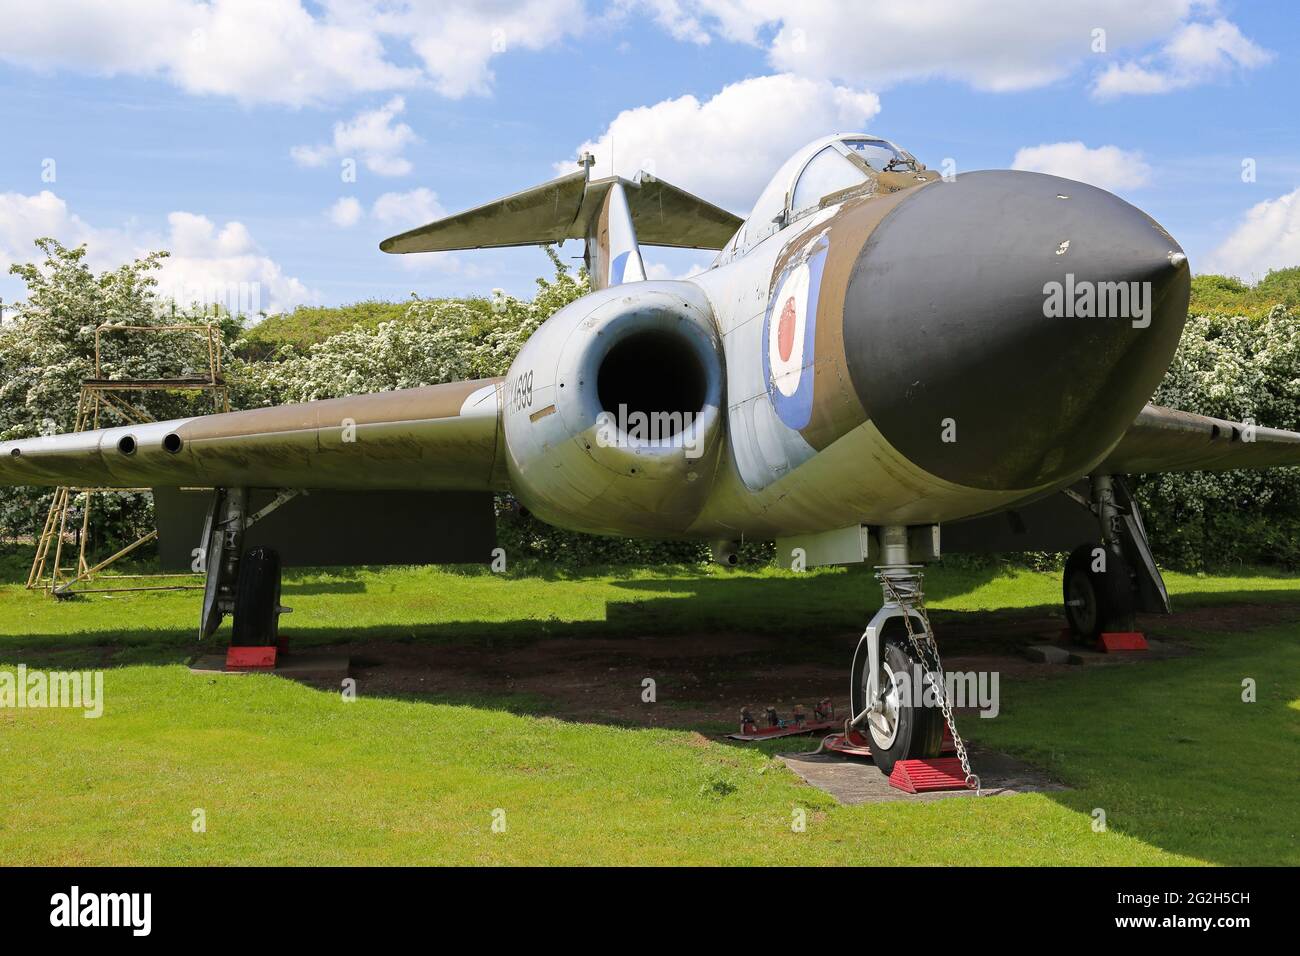 Gloster Javelin FAW.5 (1951), Midland Air Museum, Coventry Airport, Baginton, Warwickshire, England, Great Britain, UK, Europe Stock Photo